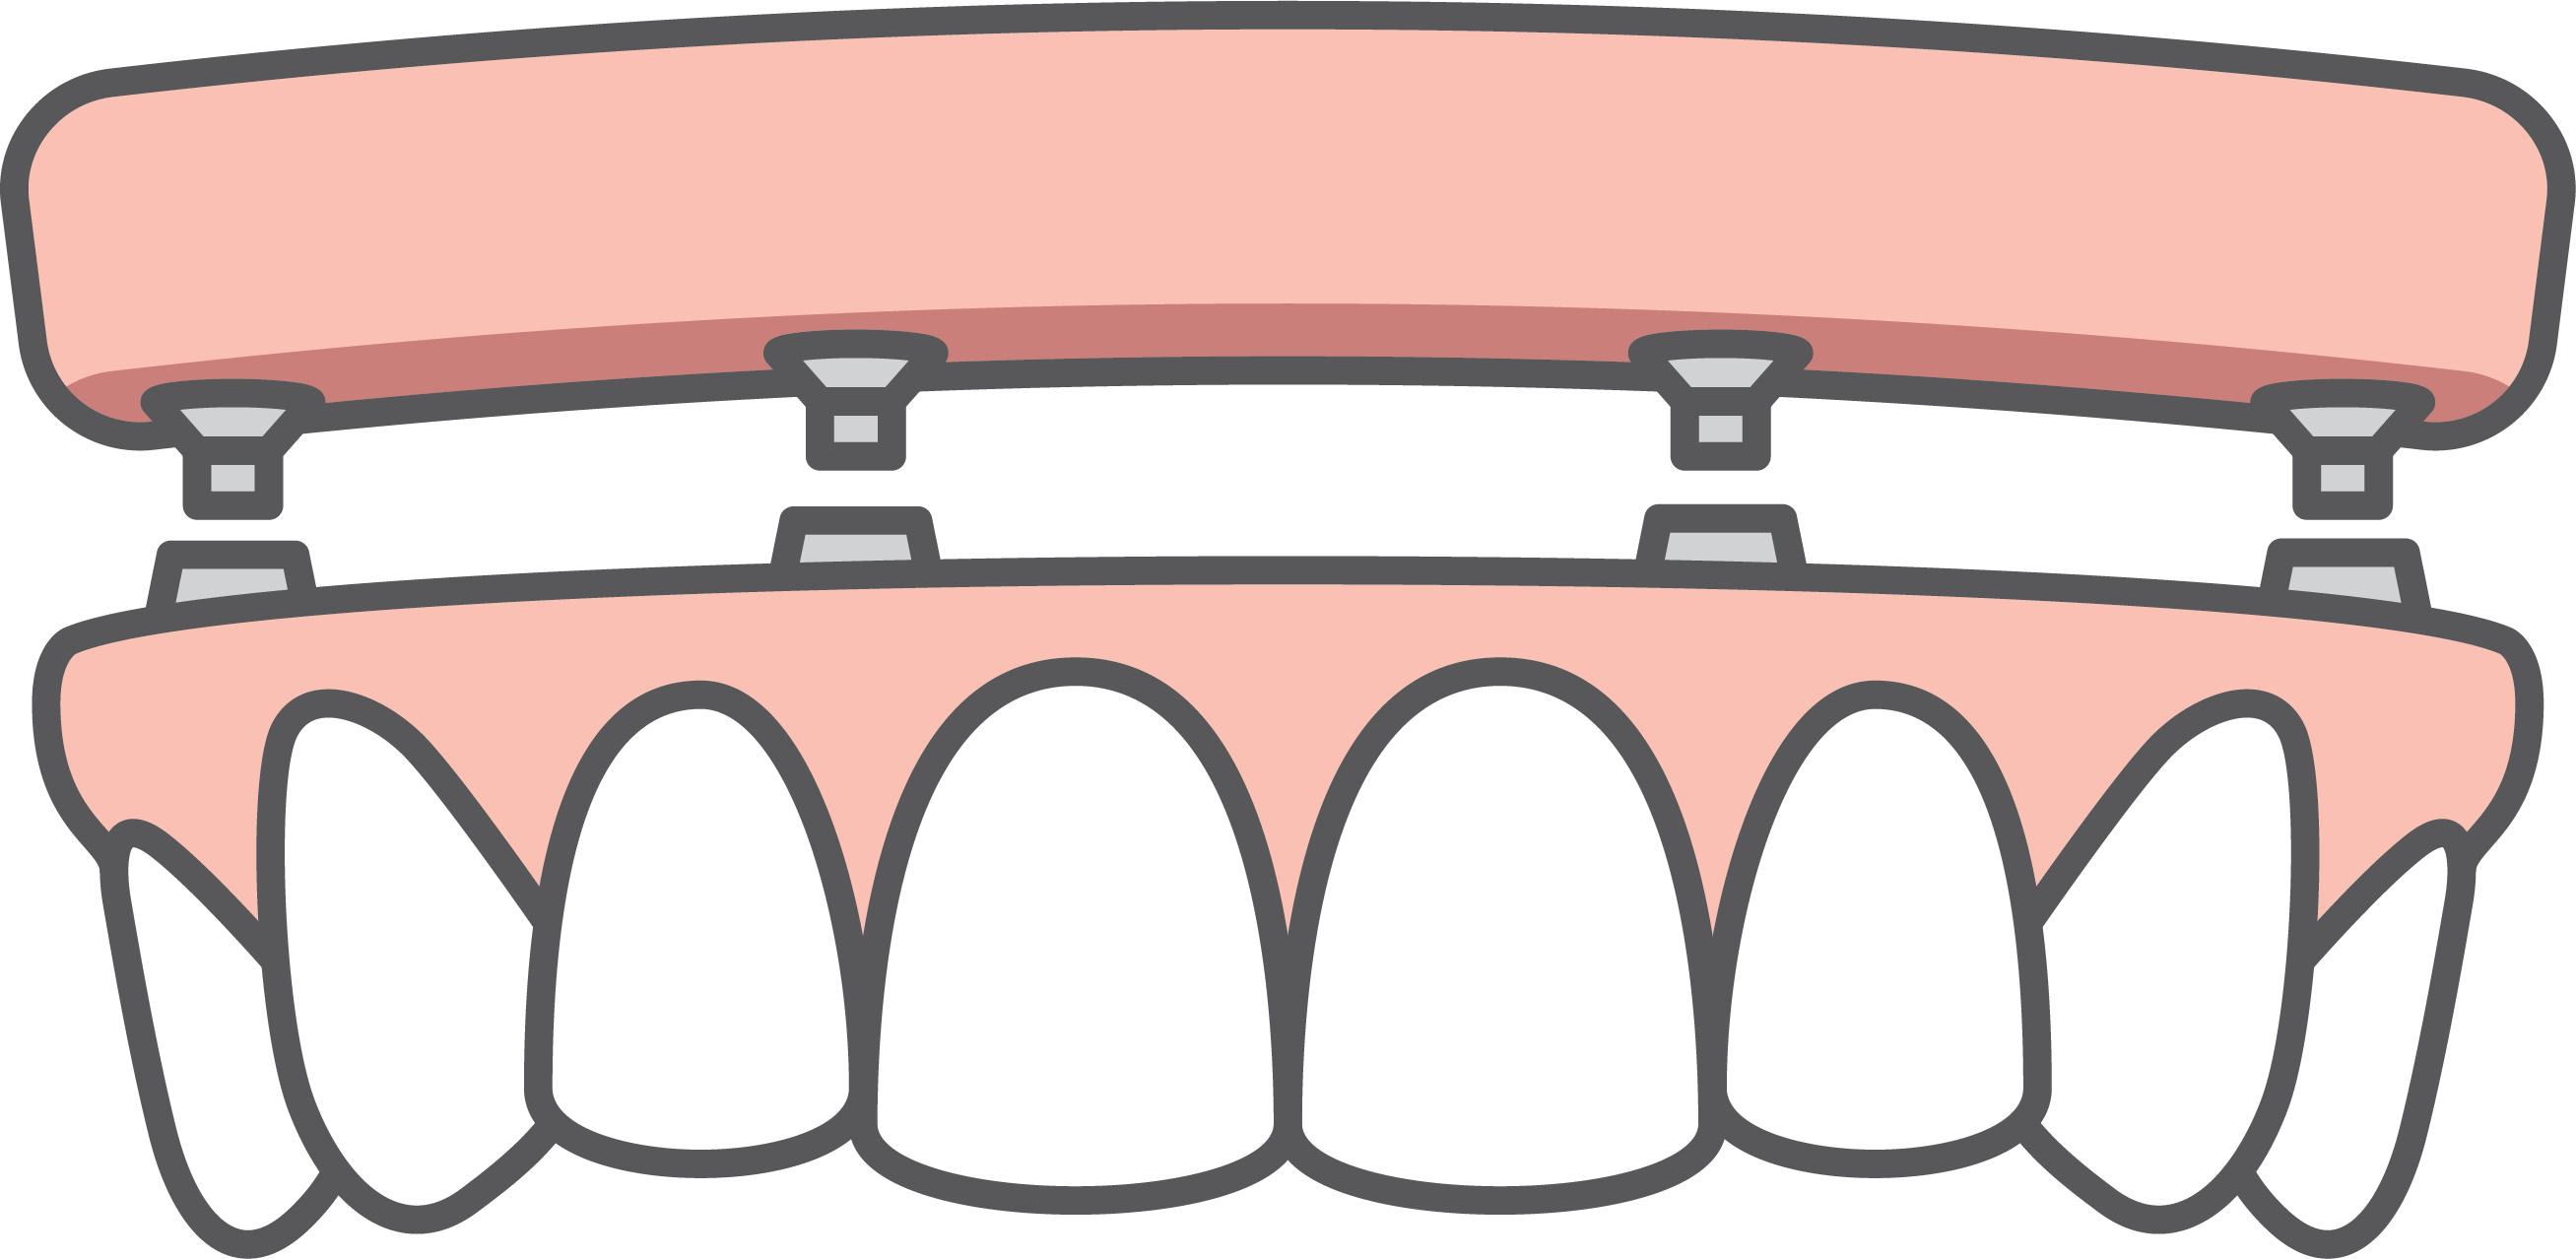 Fig 3. A complete set of dentures is held in place by dental implants.